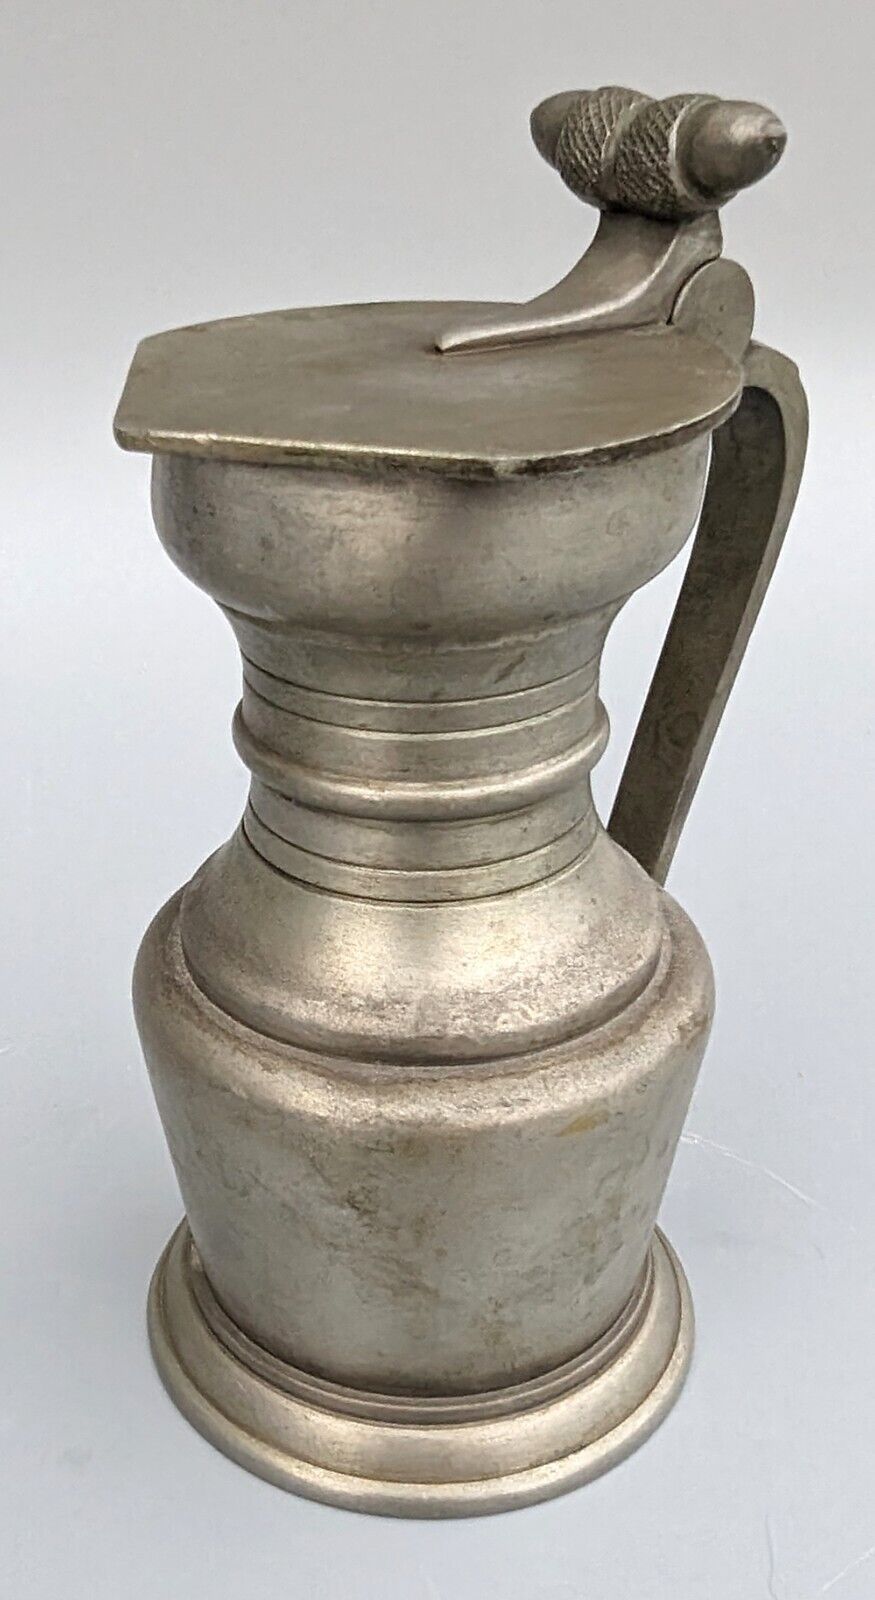 VTG German Pewter Pitcher Weygang Stamped Lid August Weygang w/ Double Acorn Top